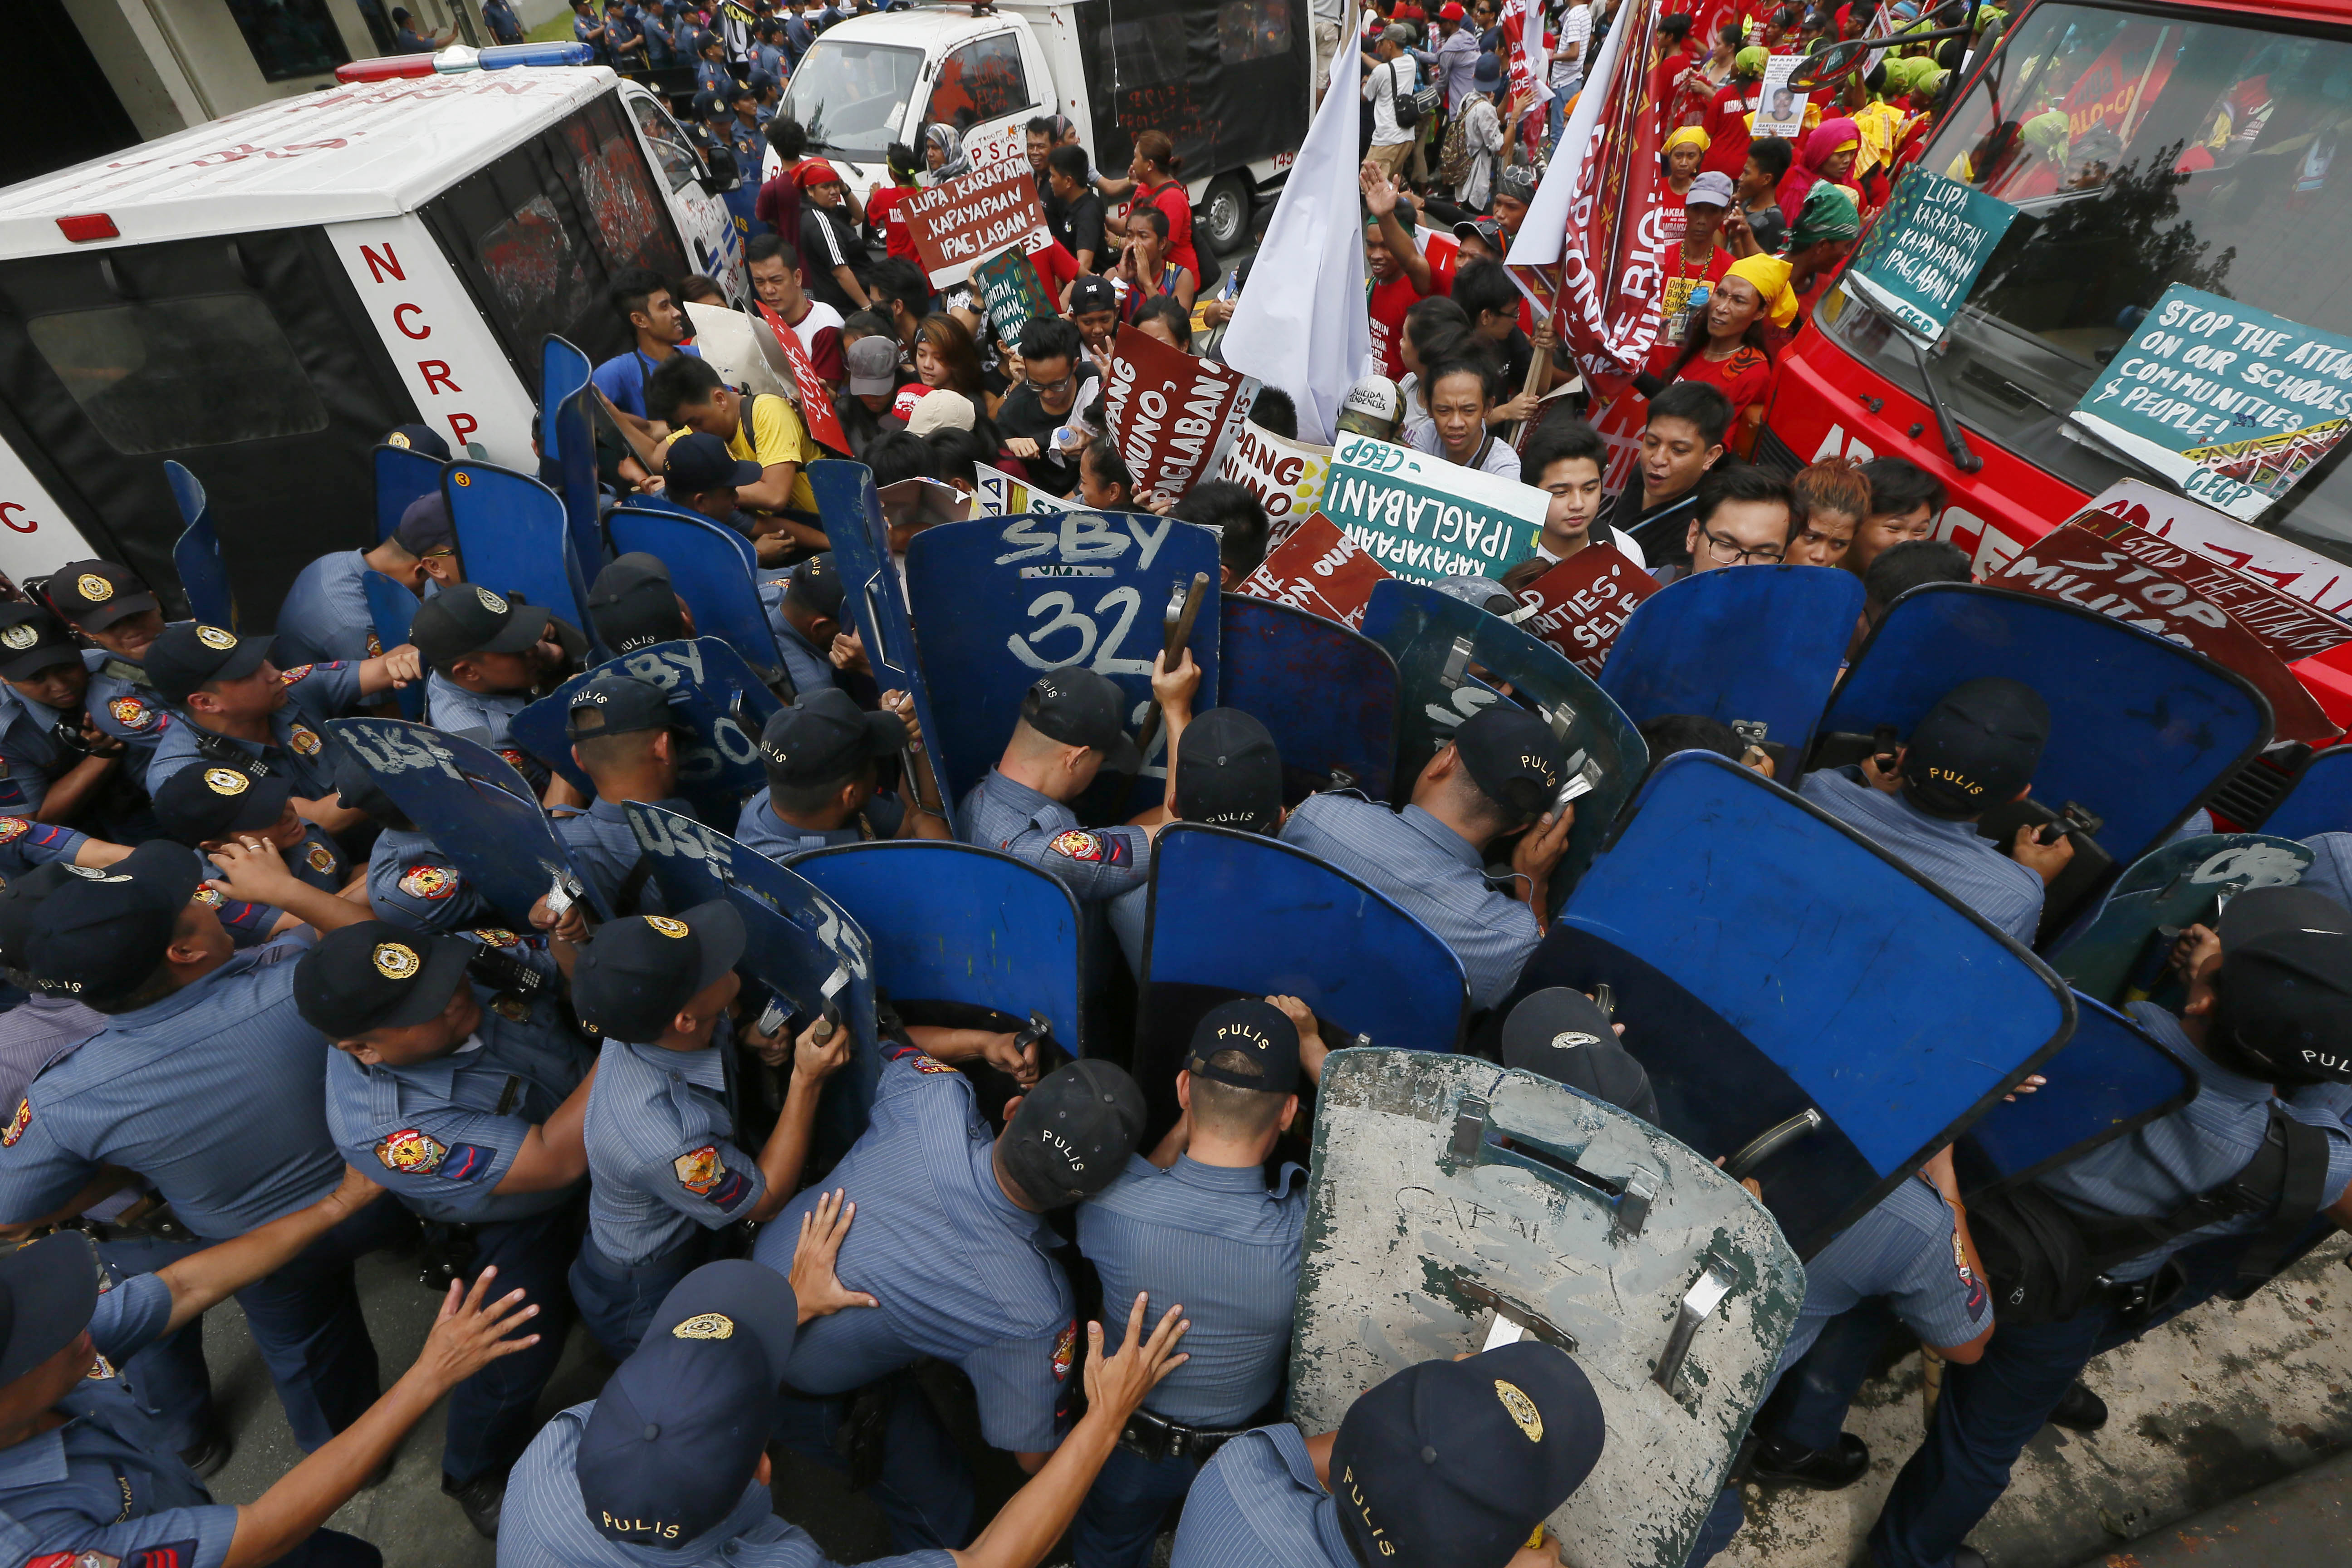 Police and protesters clash during a violent protest outside the U.S. Embassy in Manila, Philippines Wednesday, Oct. 19, 2016. A Philippine police van rammed into protesters, leaving several bloodied, as an anti-U.S. rally turned violent Wednesday at the American Embassy in Manila. (AP Photo/Bullit Marquez)